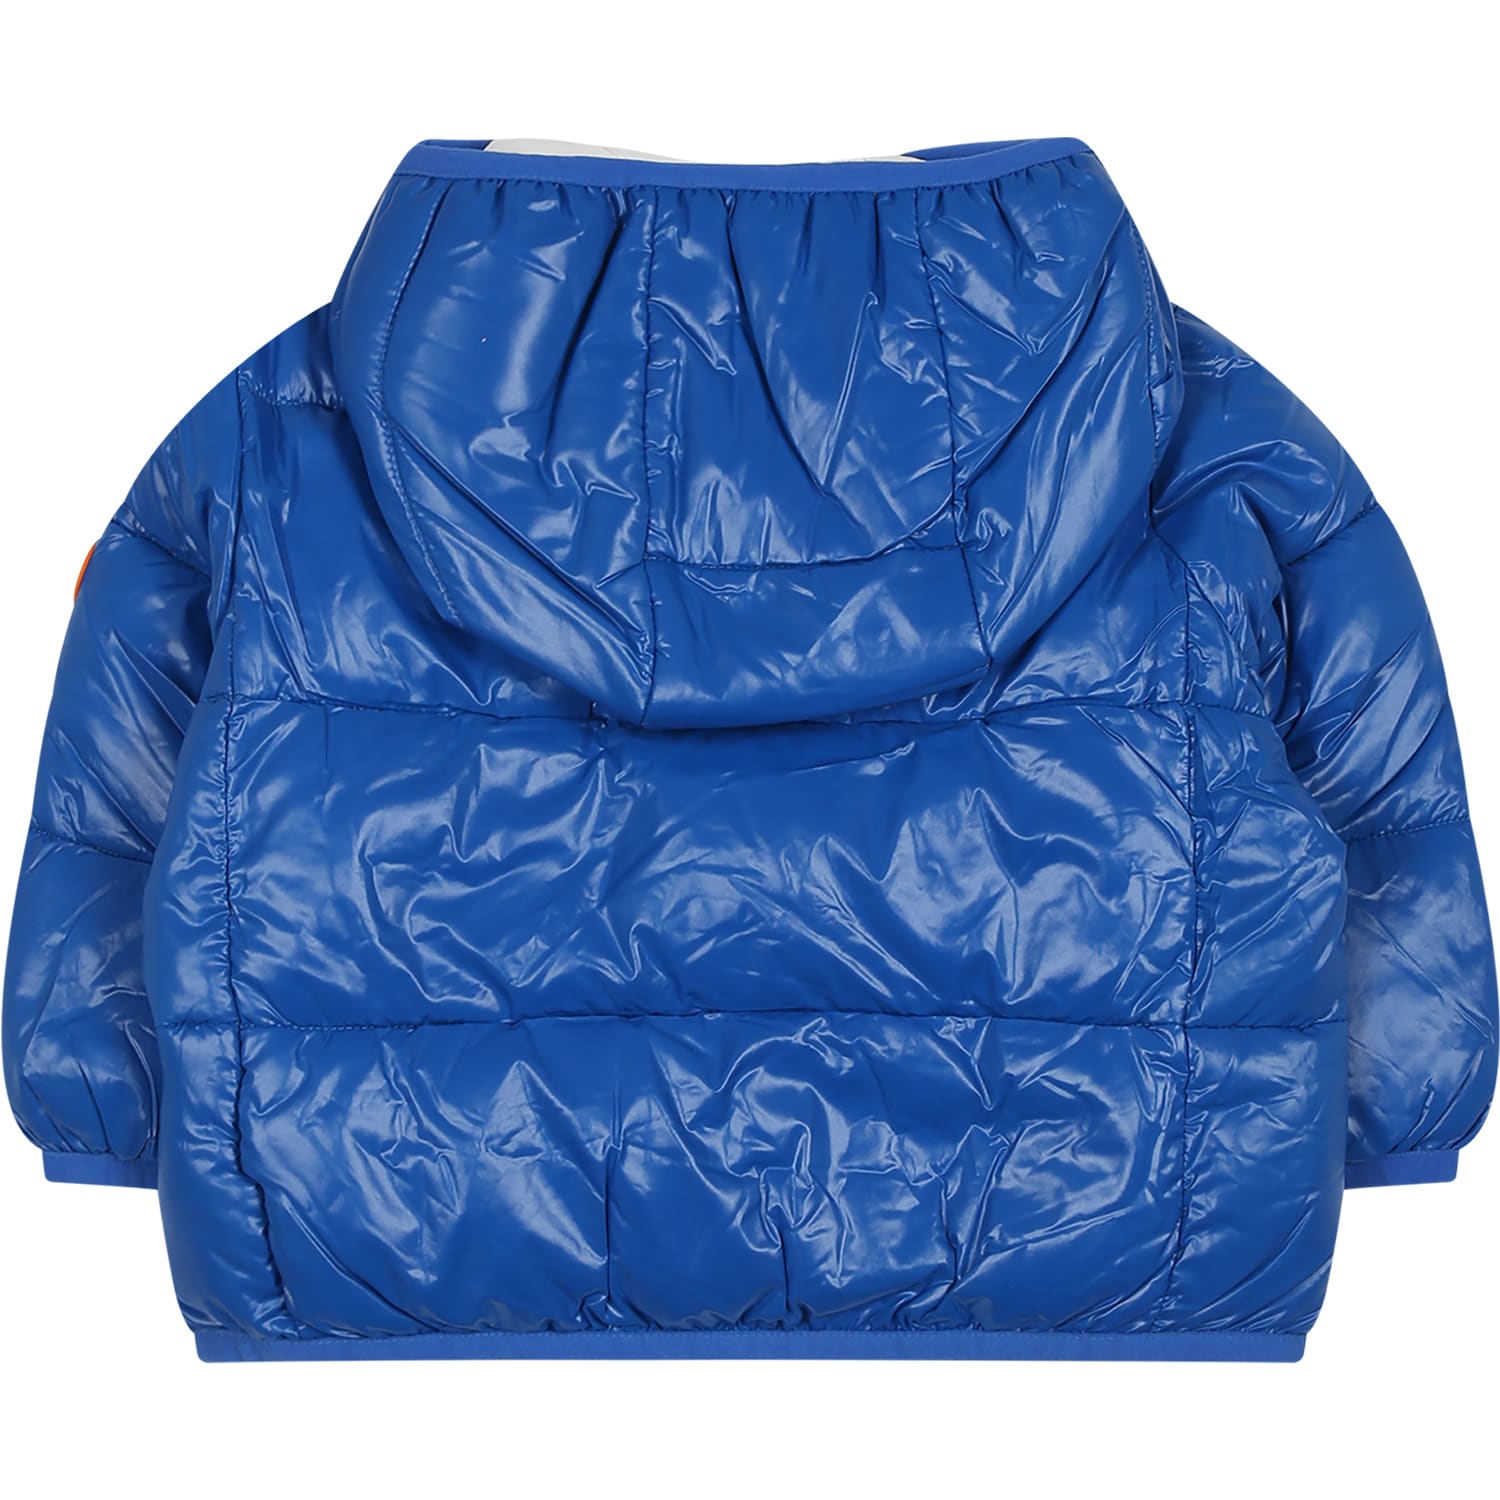 Shop Save The Duck Light Blue Jody Down Jacket For Baby Boy With Logo